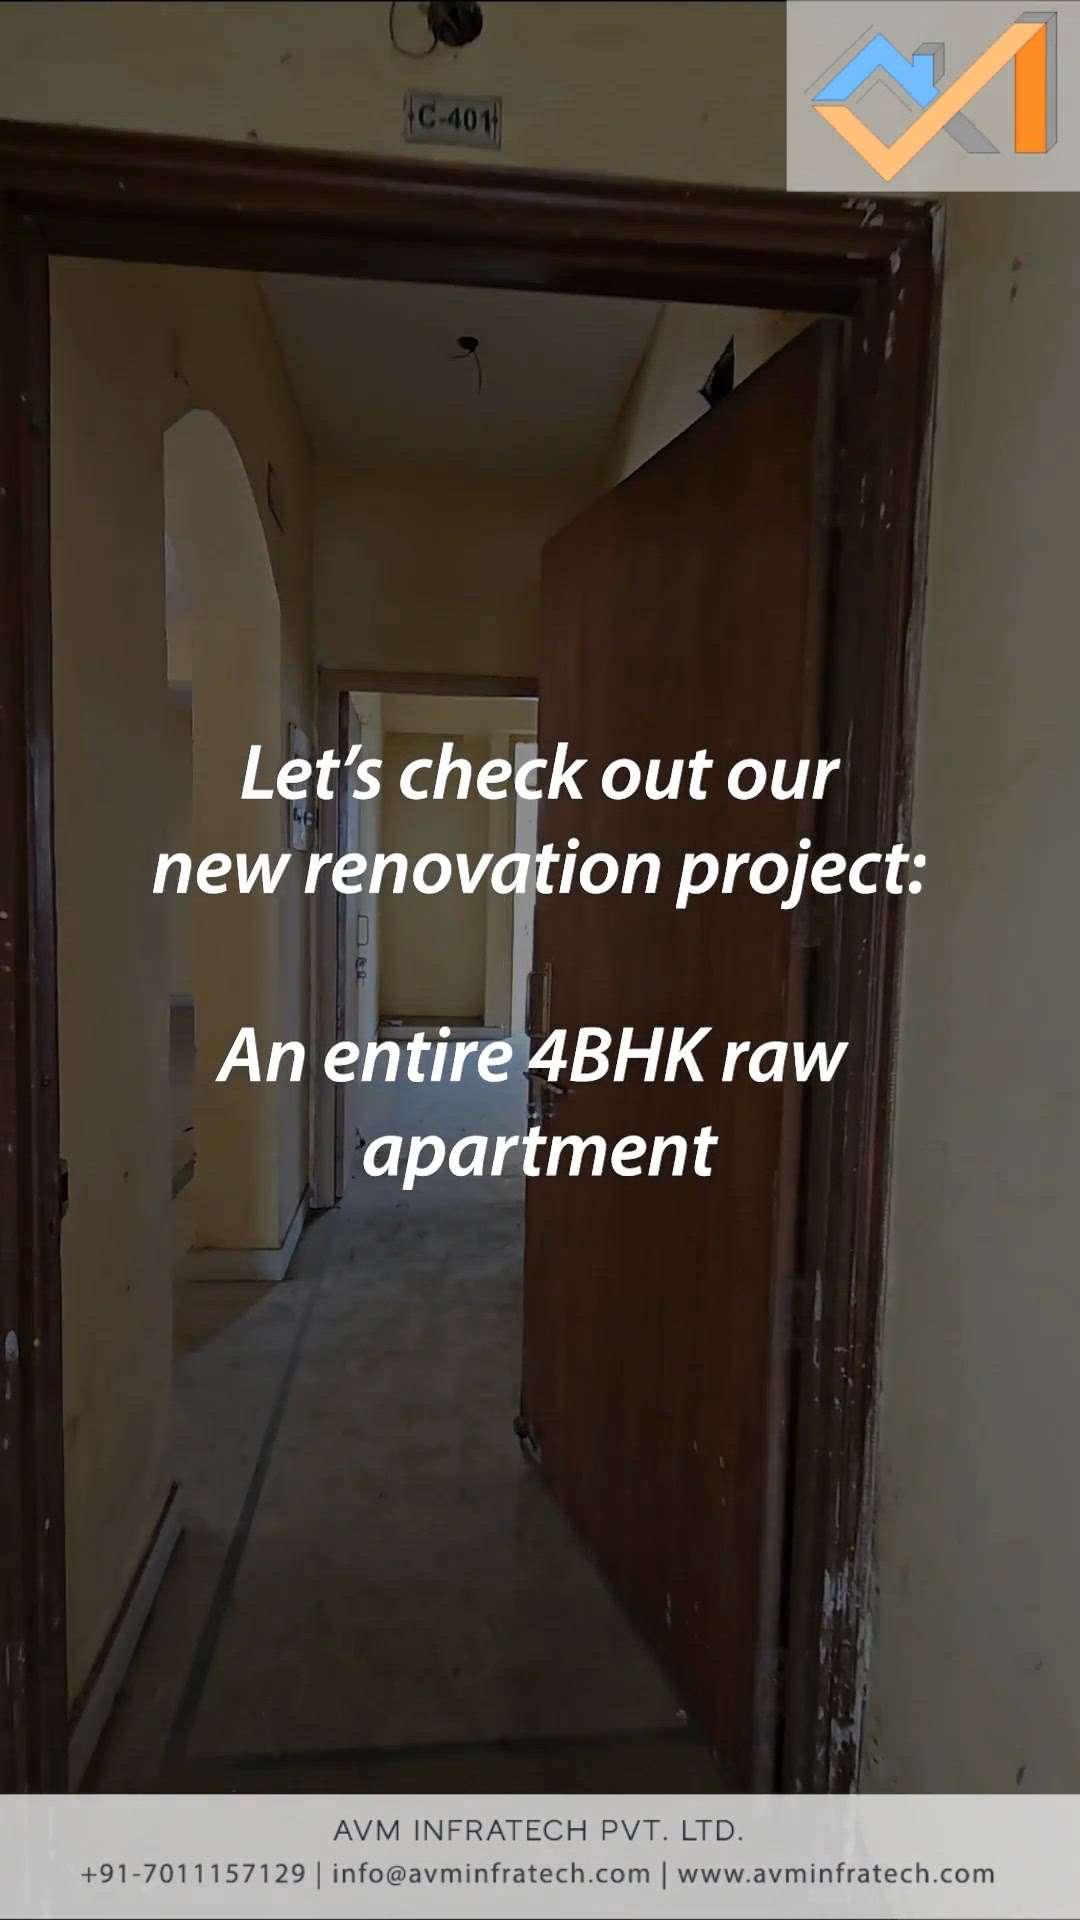 Let's check out our new house renovation project's! It's a 4 BHK raw flat and soon it will be turned into a beautiful habitable space for our client.


Follow us for more such amazing updates. 
.
.
#house #housebeautiful #housedesign #housegoals #househunting #housetour #houserenovation #houserenovations #houseremodel #houseremodel #renovation #renovations #renovationproject #avminfratech #homedecor #home